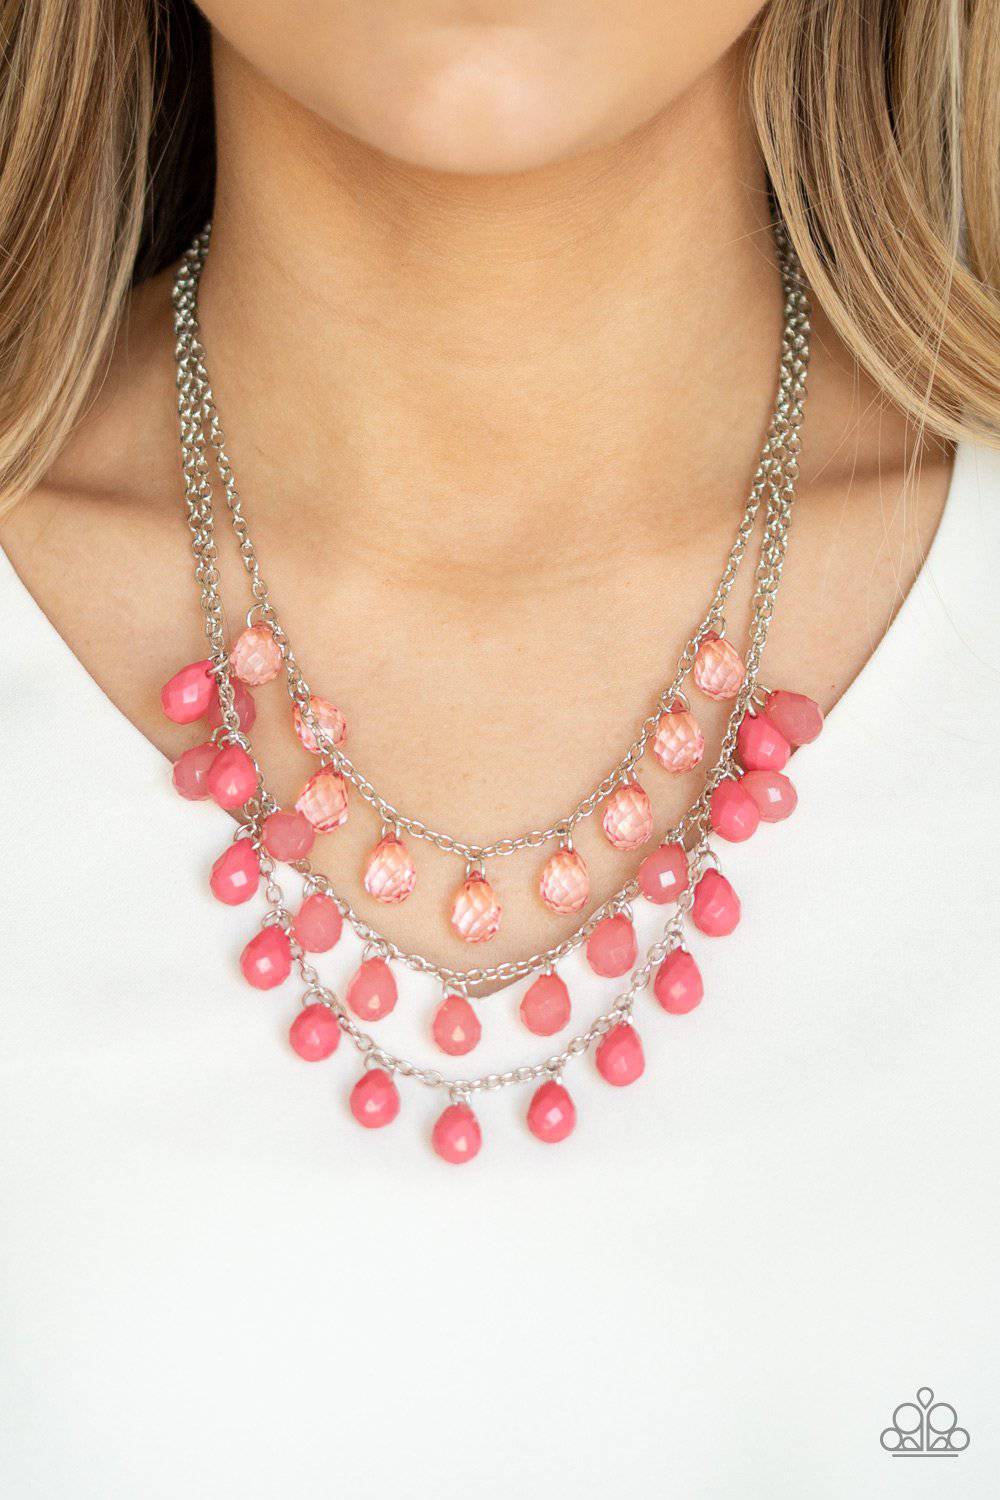 Melting Ice Caps - Coral Pink Necklace - Paparazzi Accessories - GlaMarous Titi Jewels